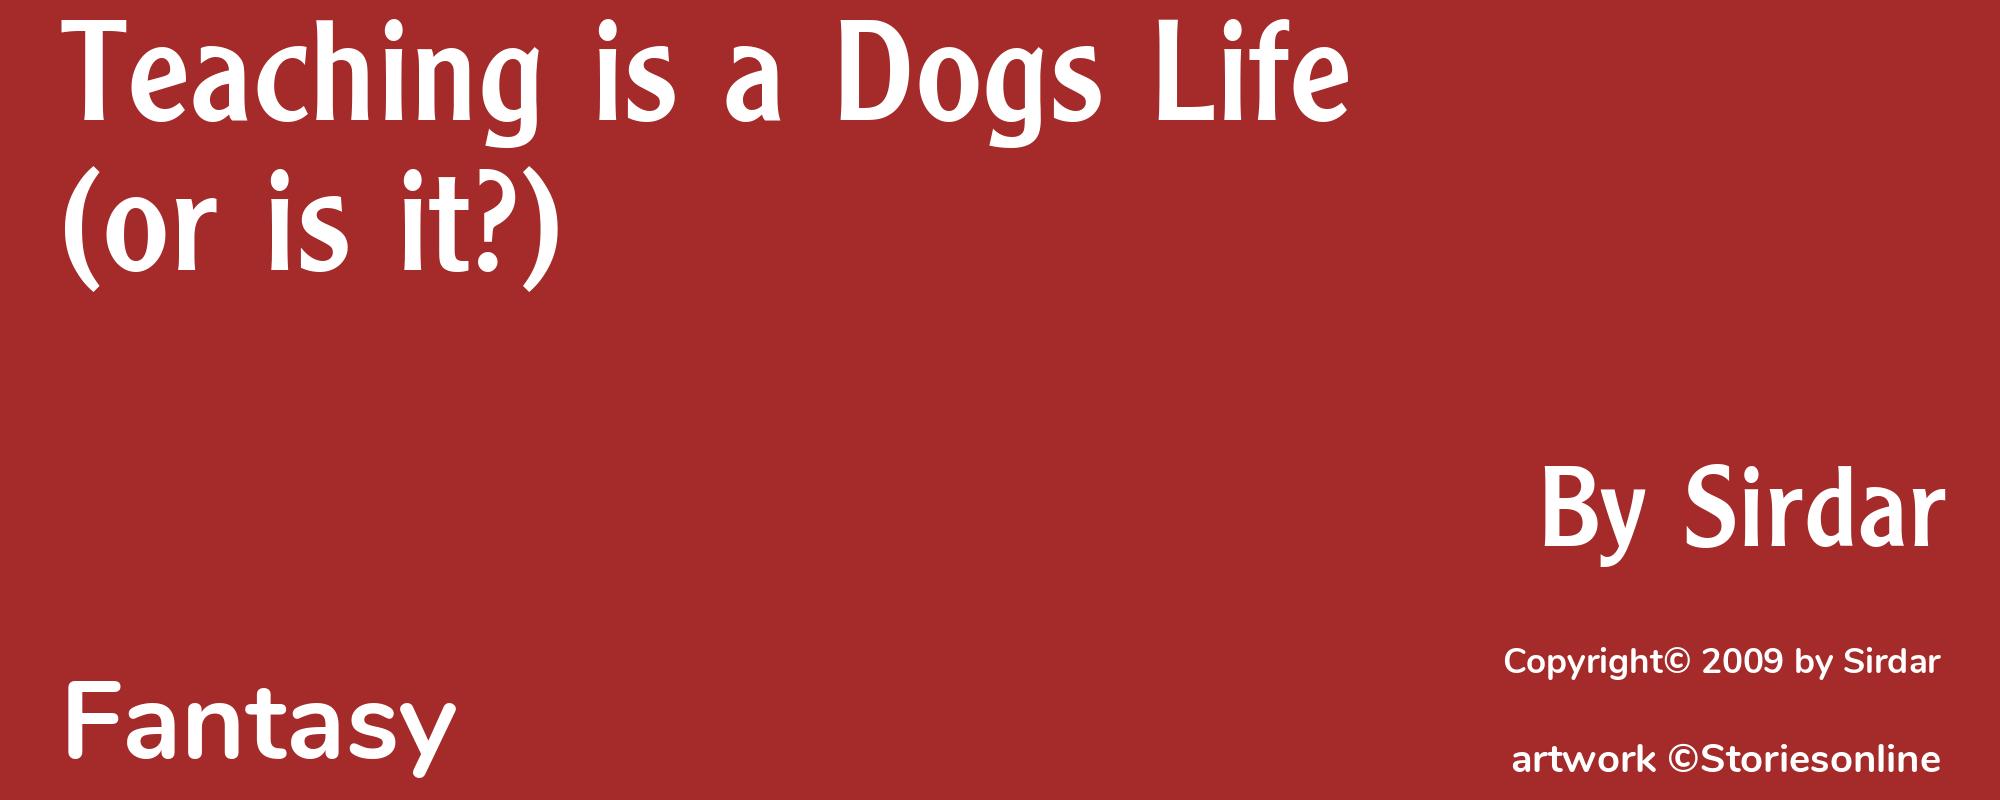 Teaching is a Dogs Life (or is it?) - Cover